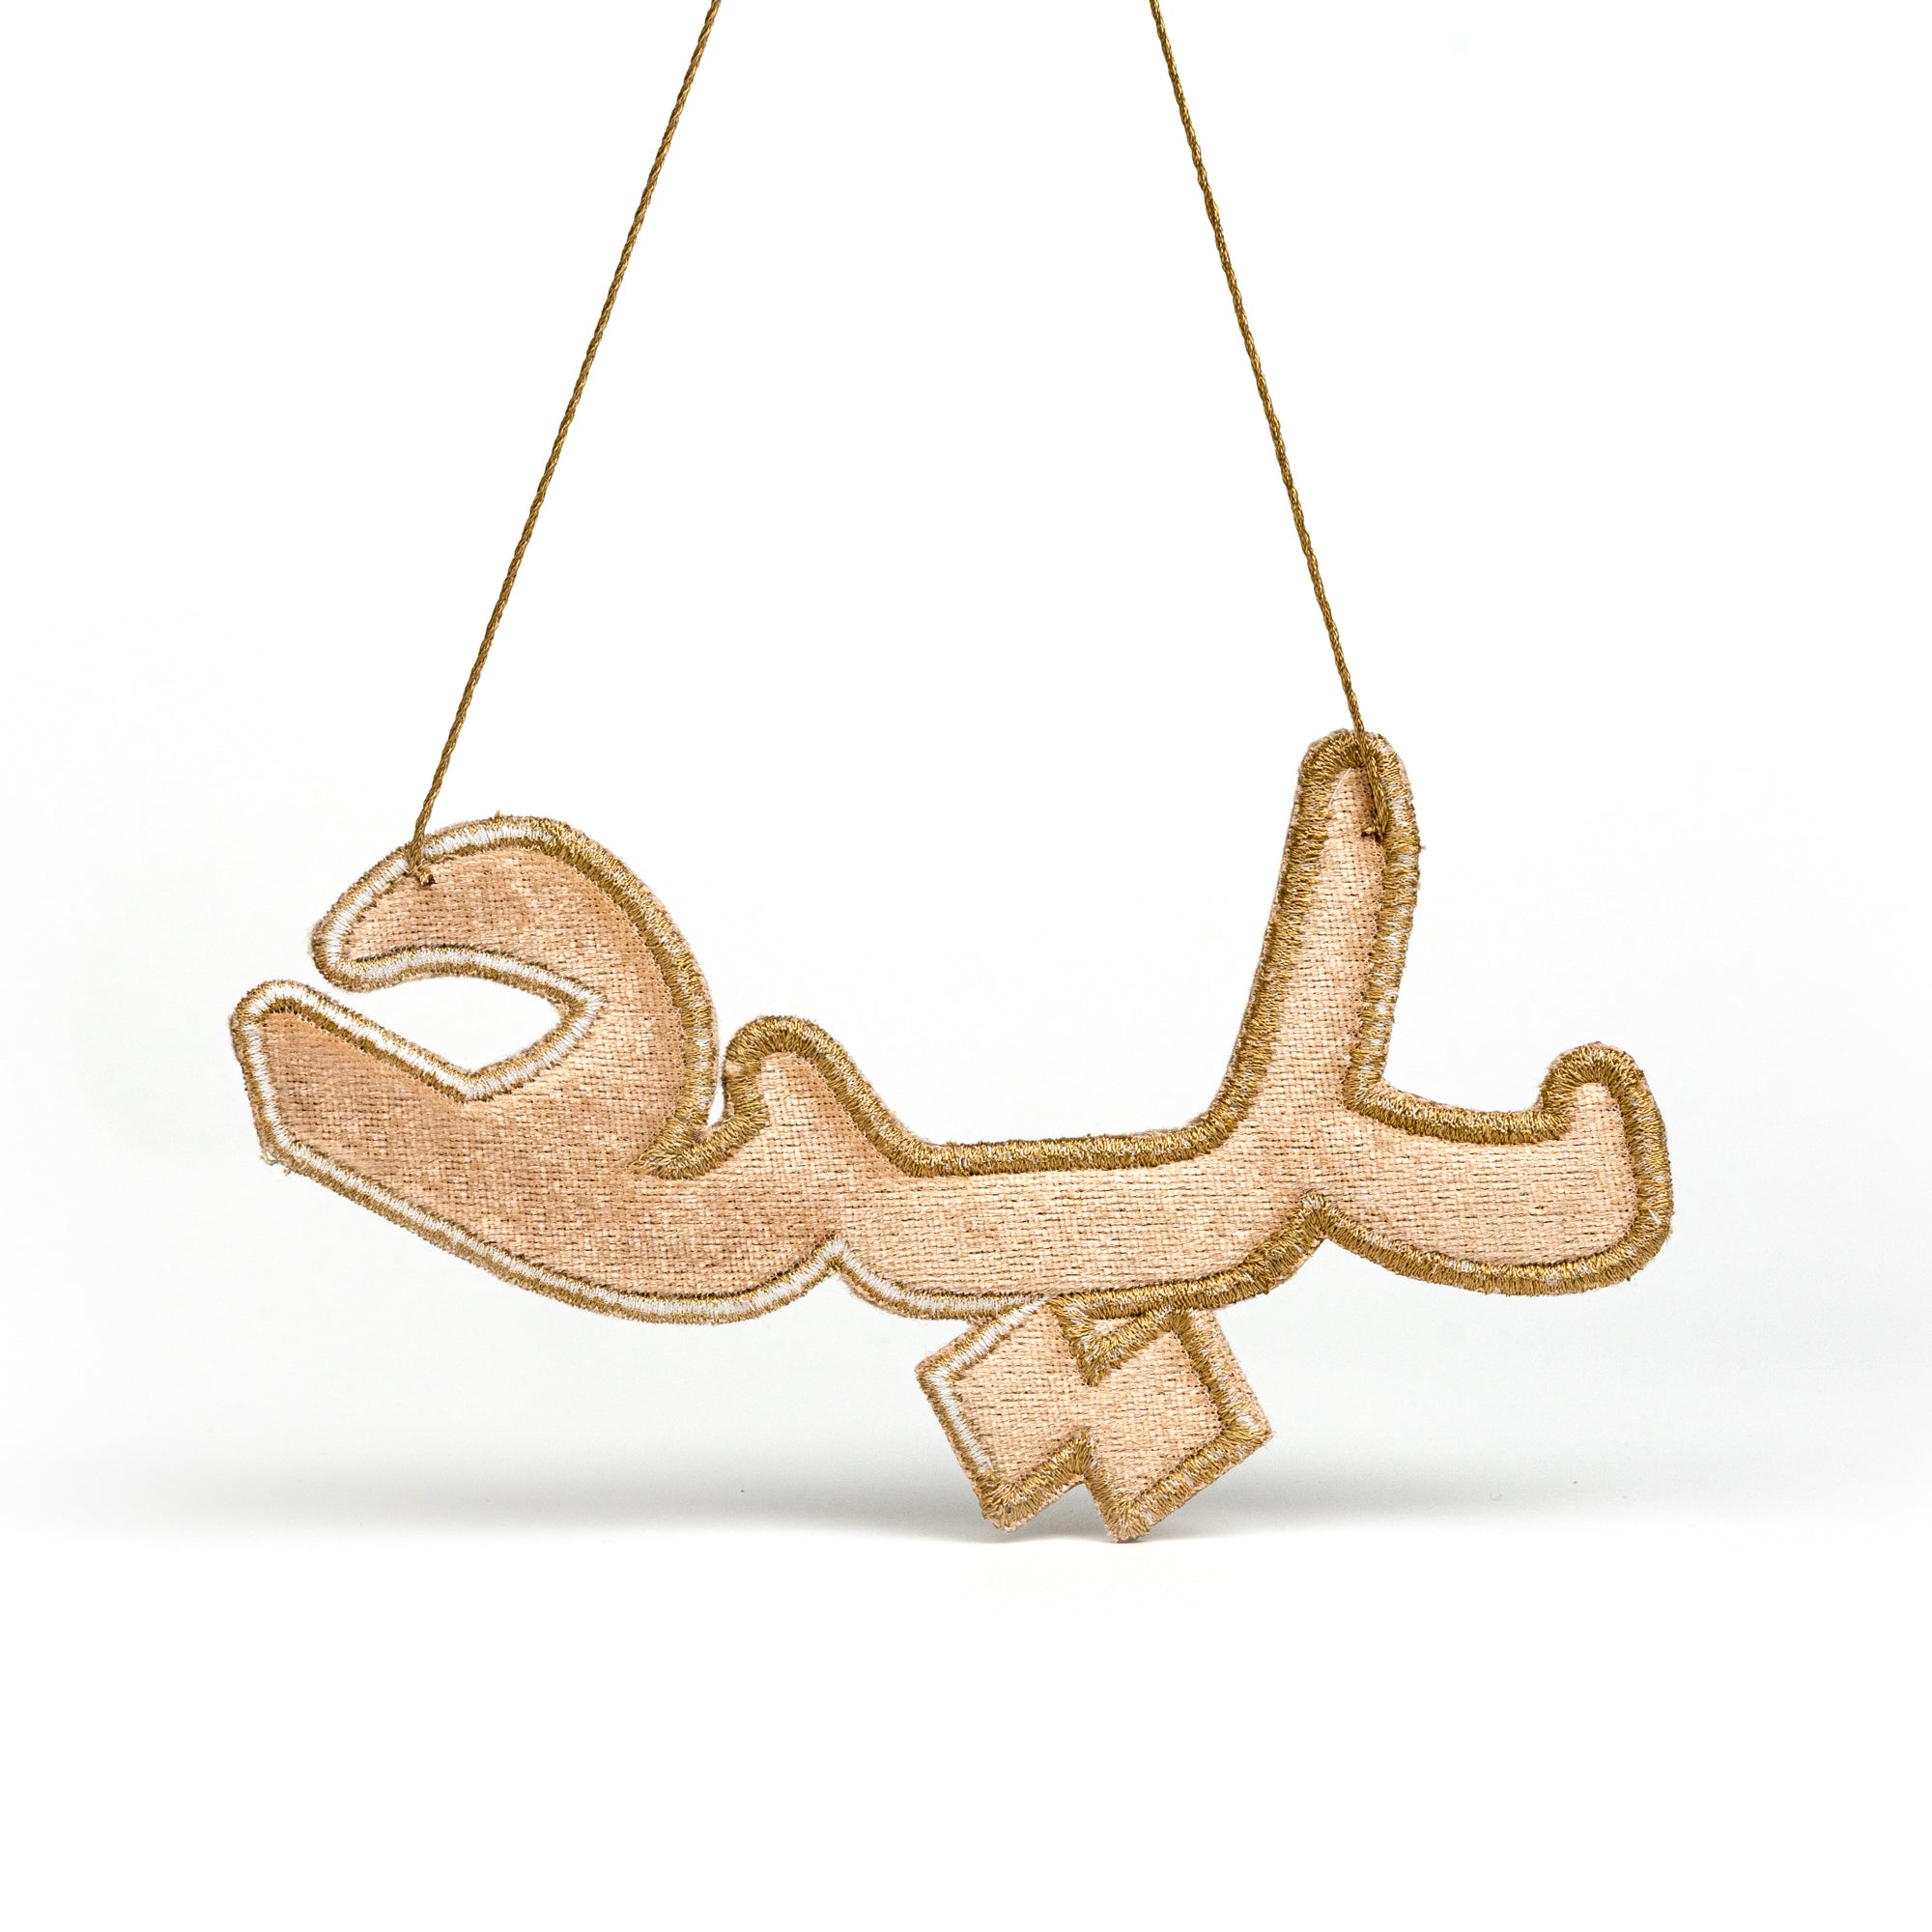  &quot;عيد&quot; Eid Golden  Arabic Calligraphy Embroidery Ornament Backside